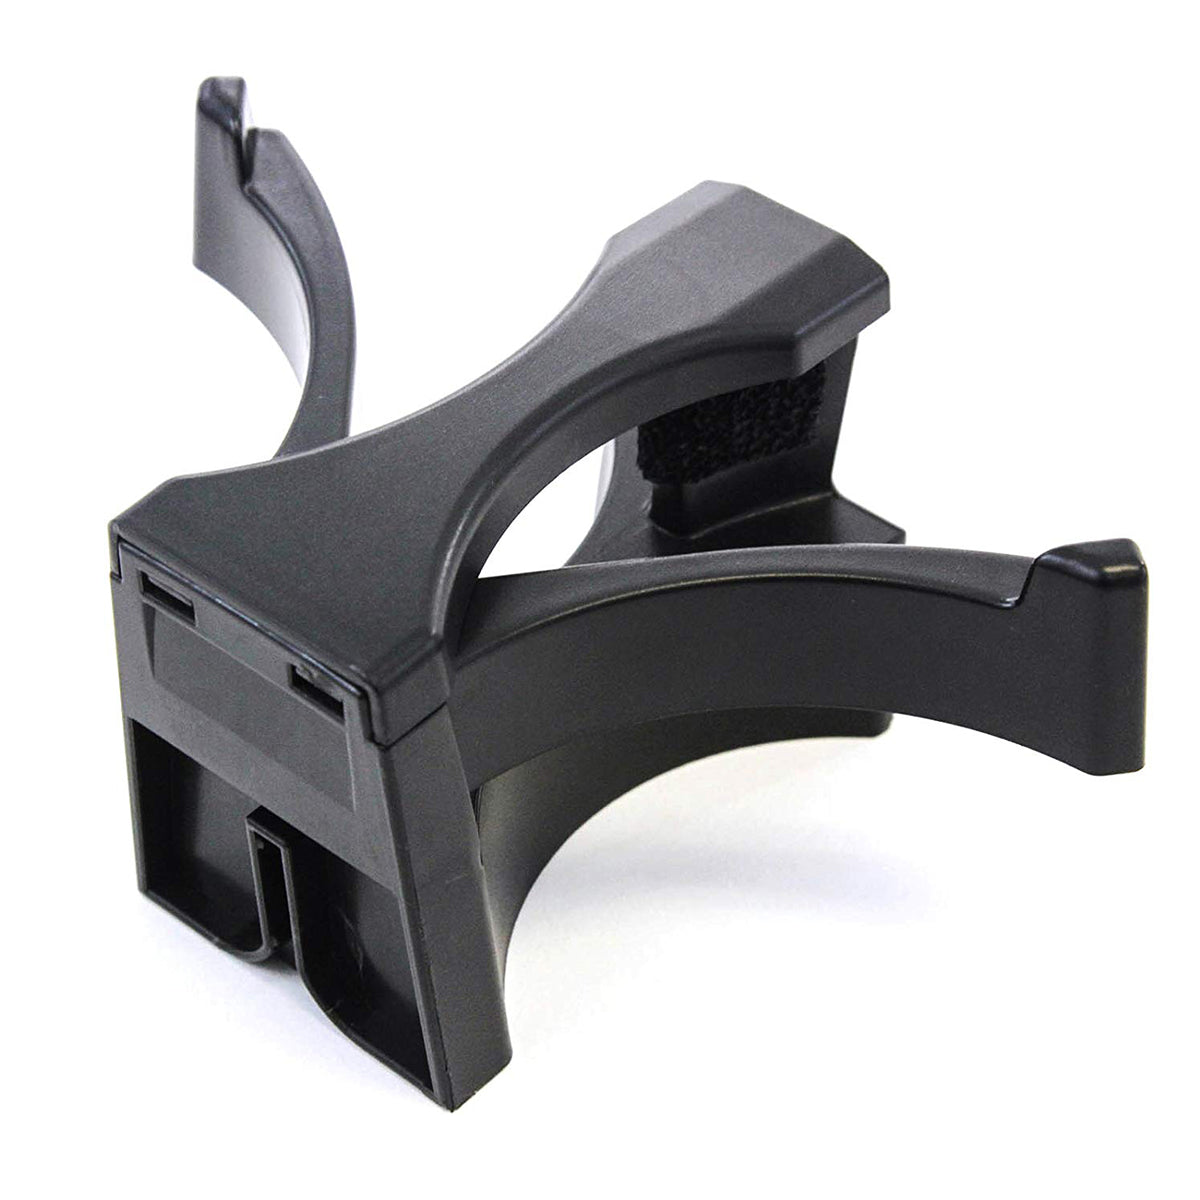 Black Center Console Cup Holder Insert Divider For Toyota Tacoma 2005-2015 New - Auto GoShop